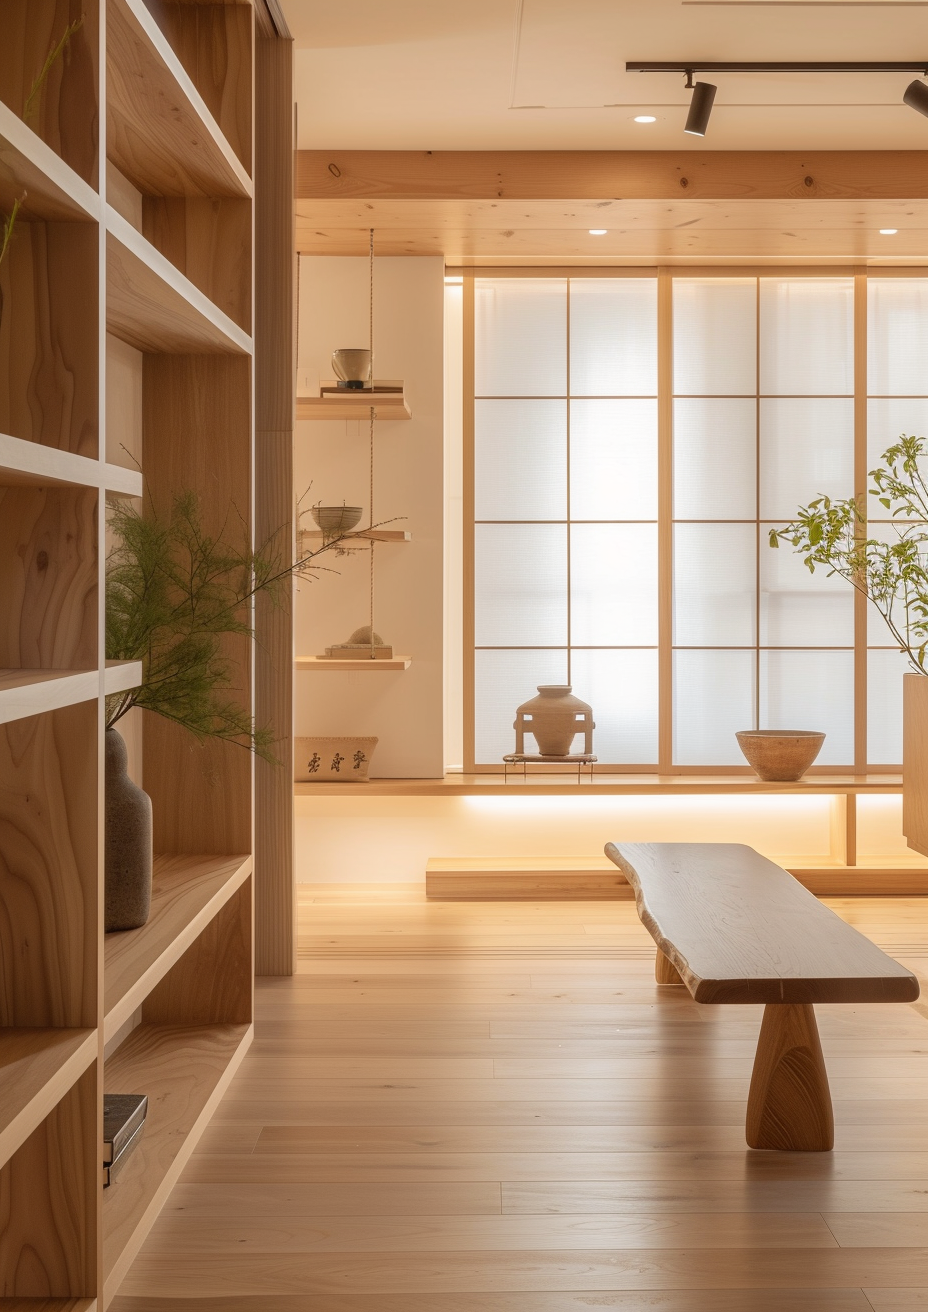 Japanese hallway furniture picks that complement the genkan's welcoming vibe